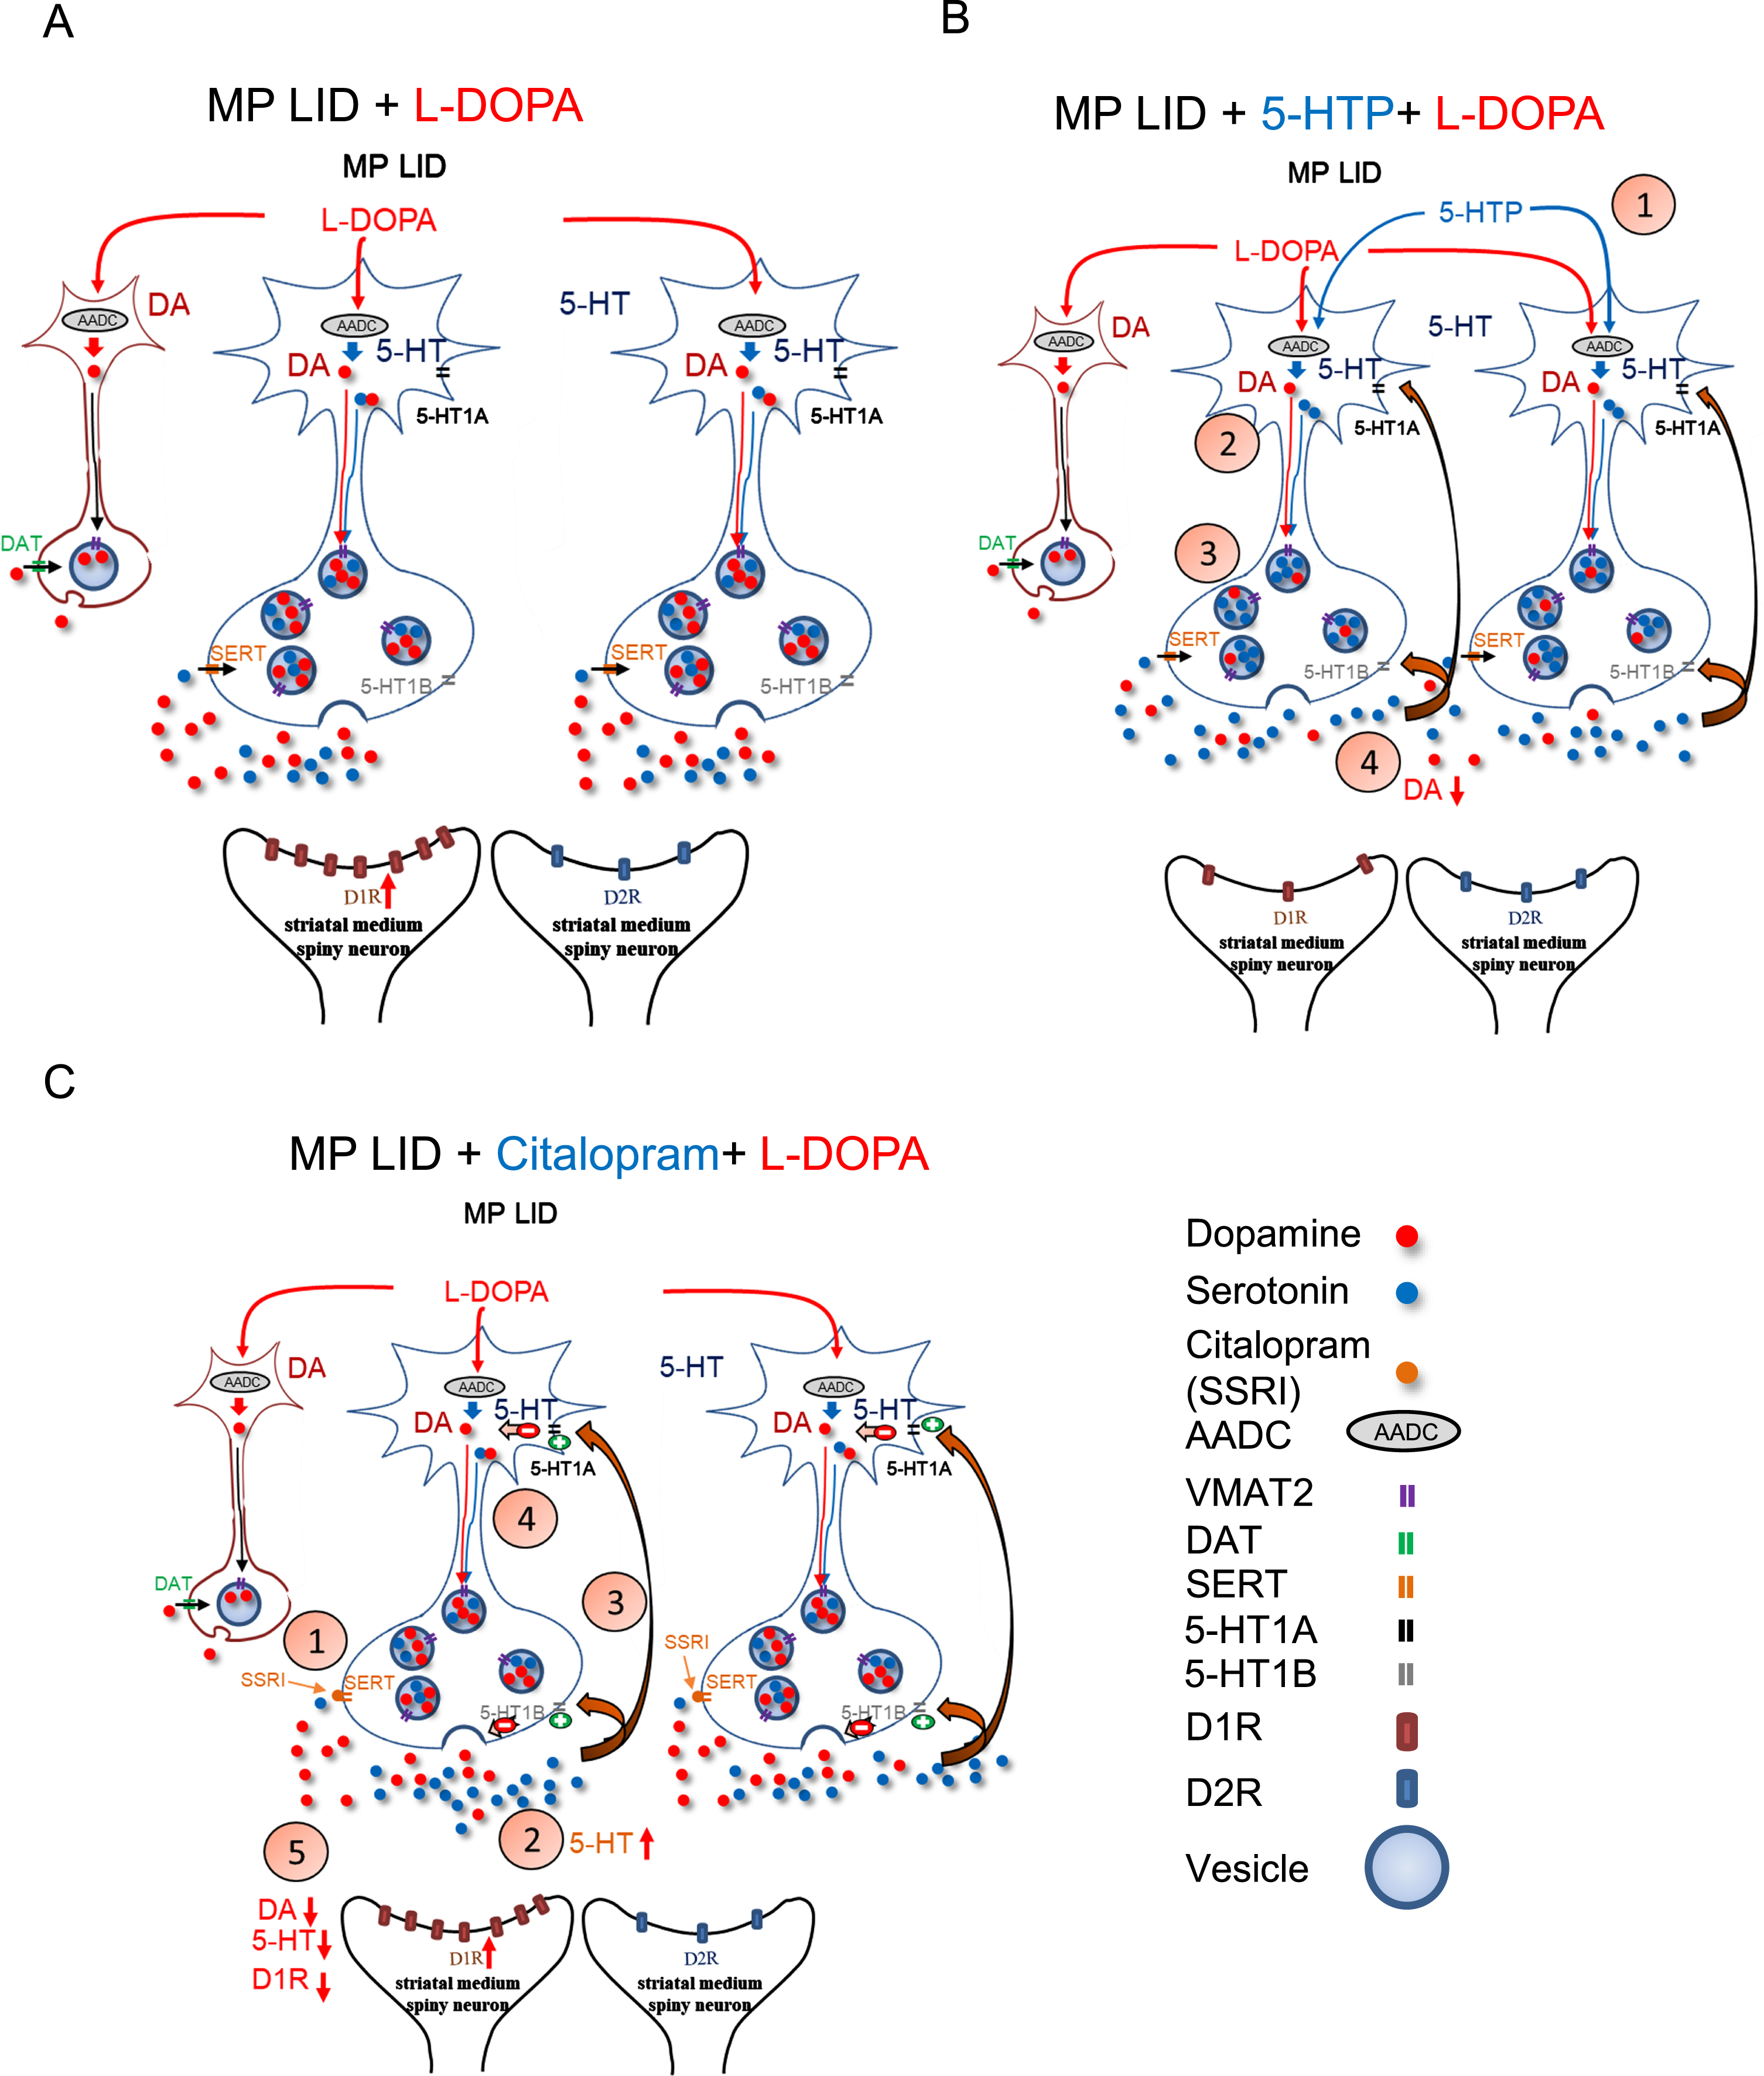 Graphical illustration delineates the effects of 5-HTP and Citalopram on DA release induced by the administration of L-DOPA in MP LID mice. A) The administration of L-DOPA induces aberrant release of DA in the synaptic cleft. The release of L-DOPA-derived DA may be regulated by the 5-HT neurons. B) Through the administration of 5-HTP, which competes with L-DOPA for AADC, the amount of DA in synaptic vesicles is reduced, thereby partially normalizing the abnormal DA levels in the synaptic cleft. Moreover, 5-HTP-derived 5-HT could activate 5-HT1 receptors, subsequently downregulating serotonin neuron-derived DA release in the DA-denervated striatum. C) Citalopram, by inhibiting SERT activity, may impede the reuptake of DA into presynaptic serotonin neurons, which attenuates the L-DOPA-induced aberrant DA release in the DA-denervated striatum. In addition, Citalopram administration increases serotonin concentration in the synaptic cleft by inhibiting SERT reuptake. Subsequently, excess 5-HT activates 5-HT1 receptors, subsequently inhibiting 5-HT neuron activity and reducing serotonin neuron-derived DA release after L-DOPA administration.